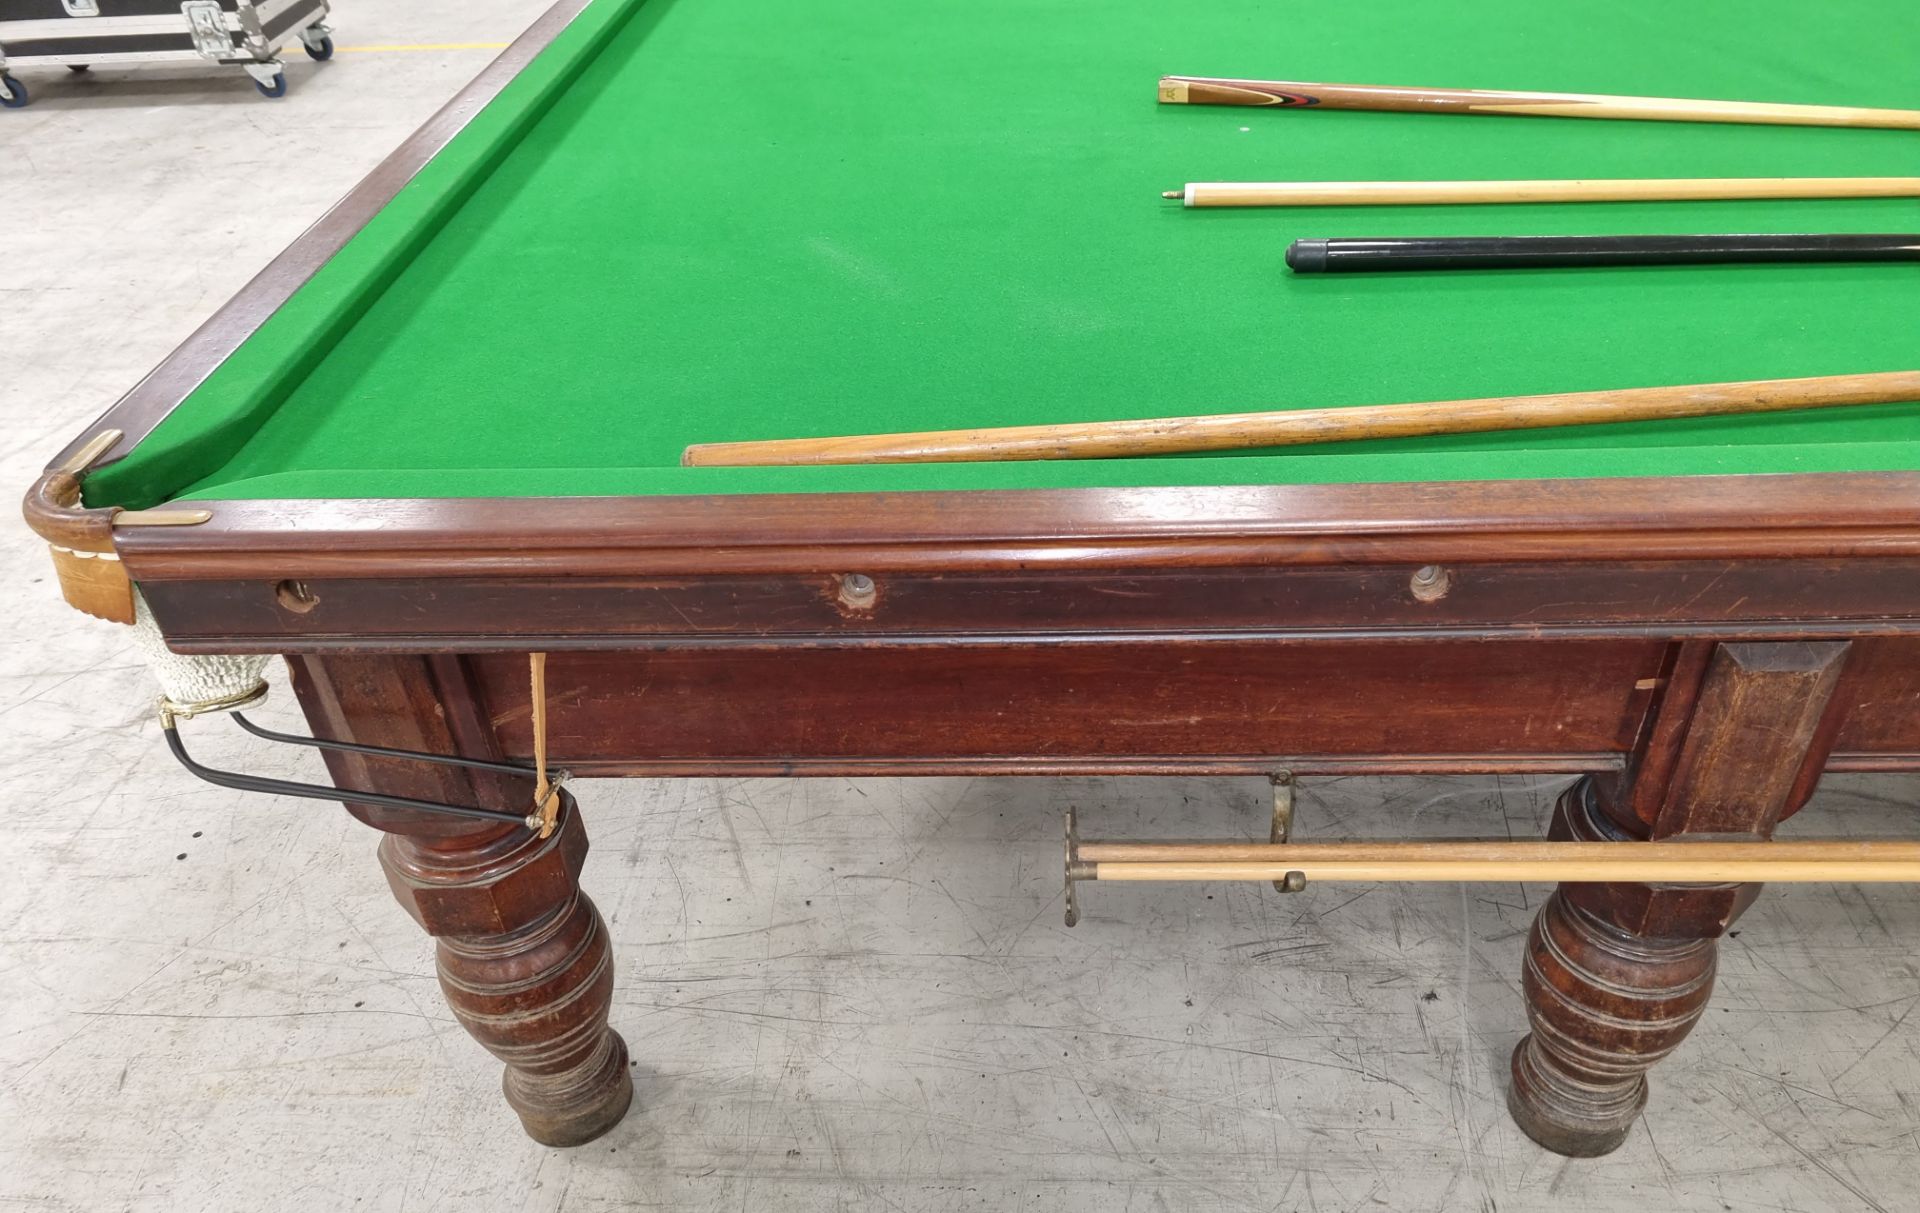 Orme & Sons Manchester 12ft snooker table with cues, cue rests, cover, and lighting - Image 10 of 25